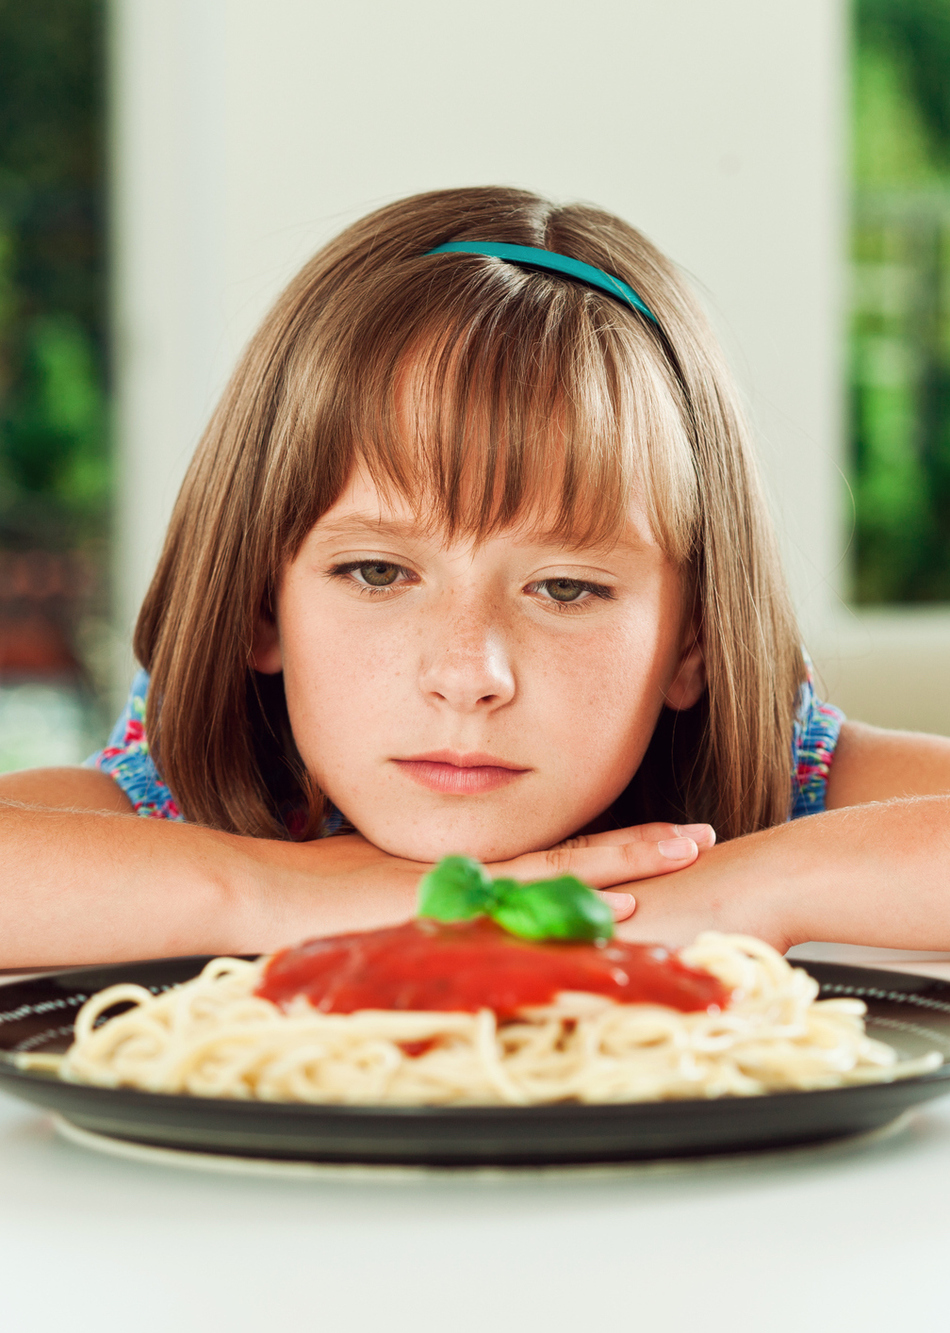 How Do I Know if My Child Has an Eating Disorder?